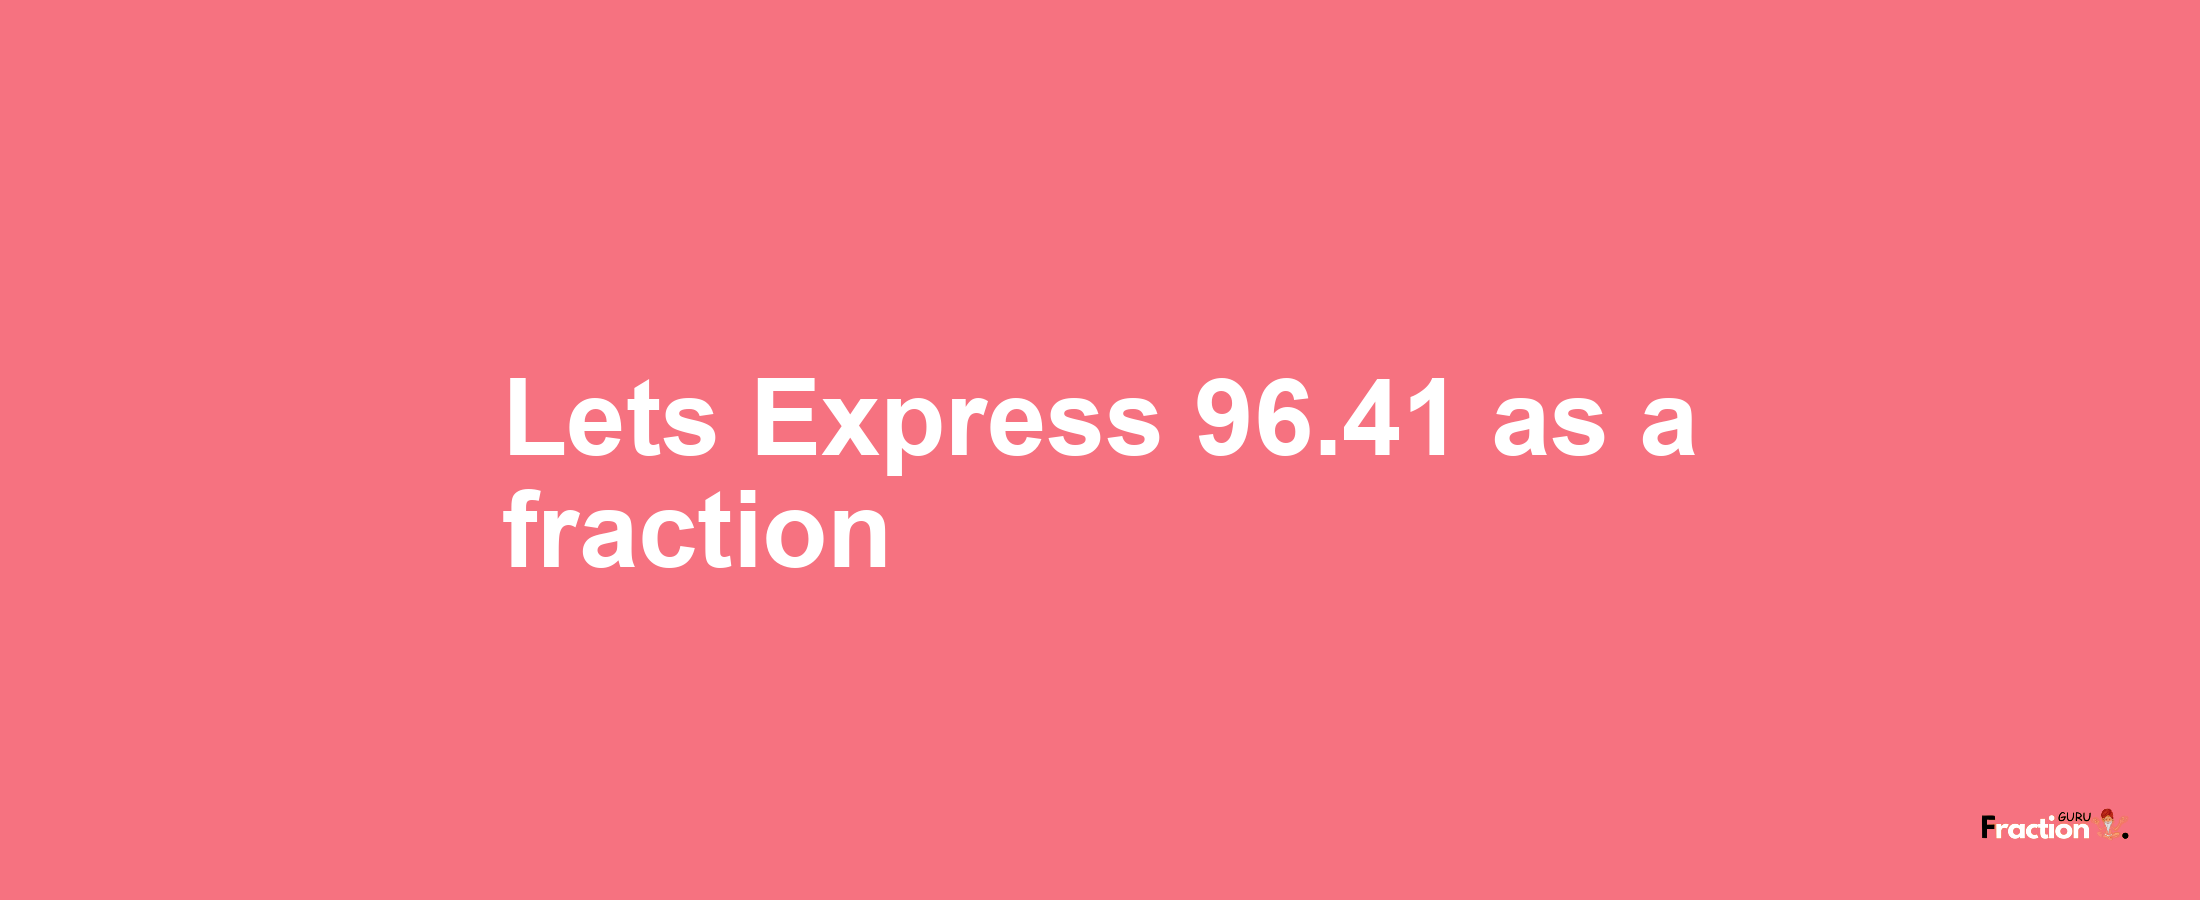 Lets Express 96.41 as afraction